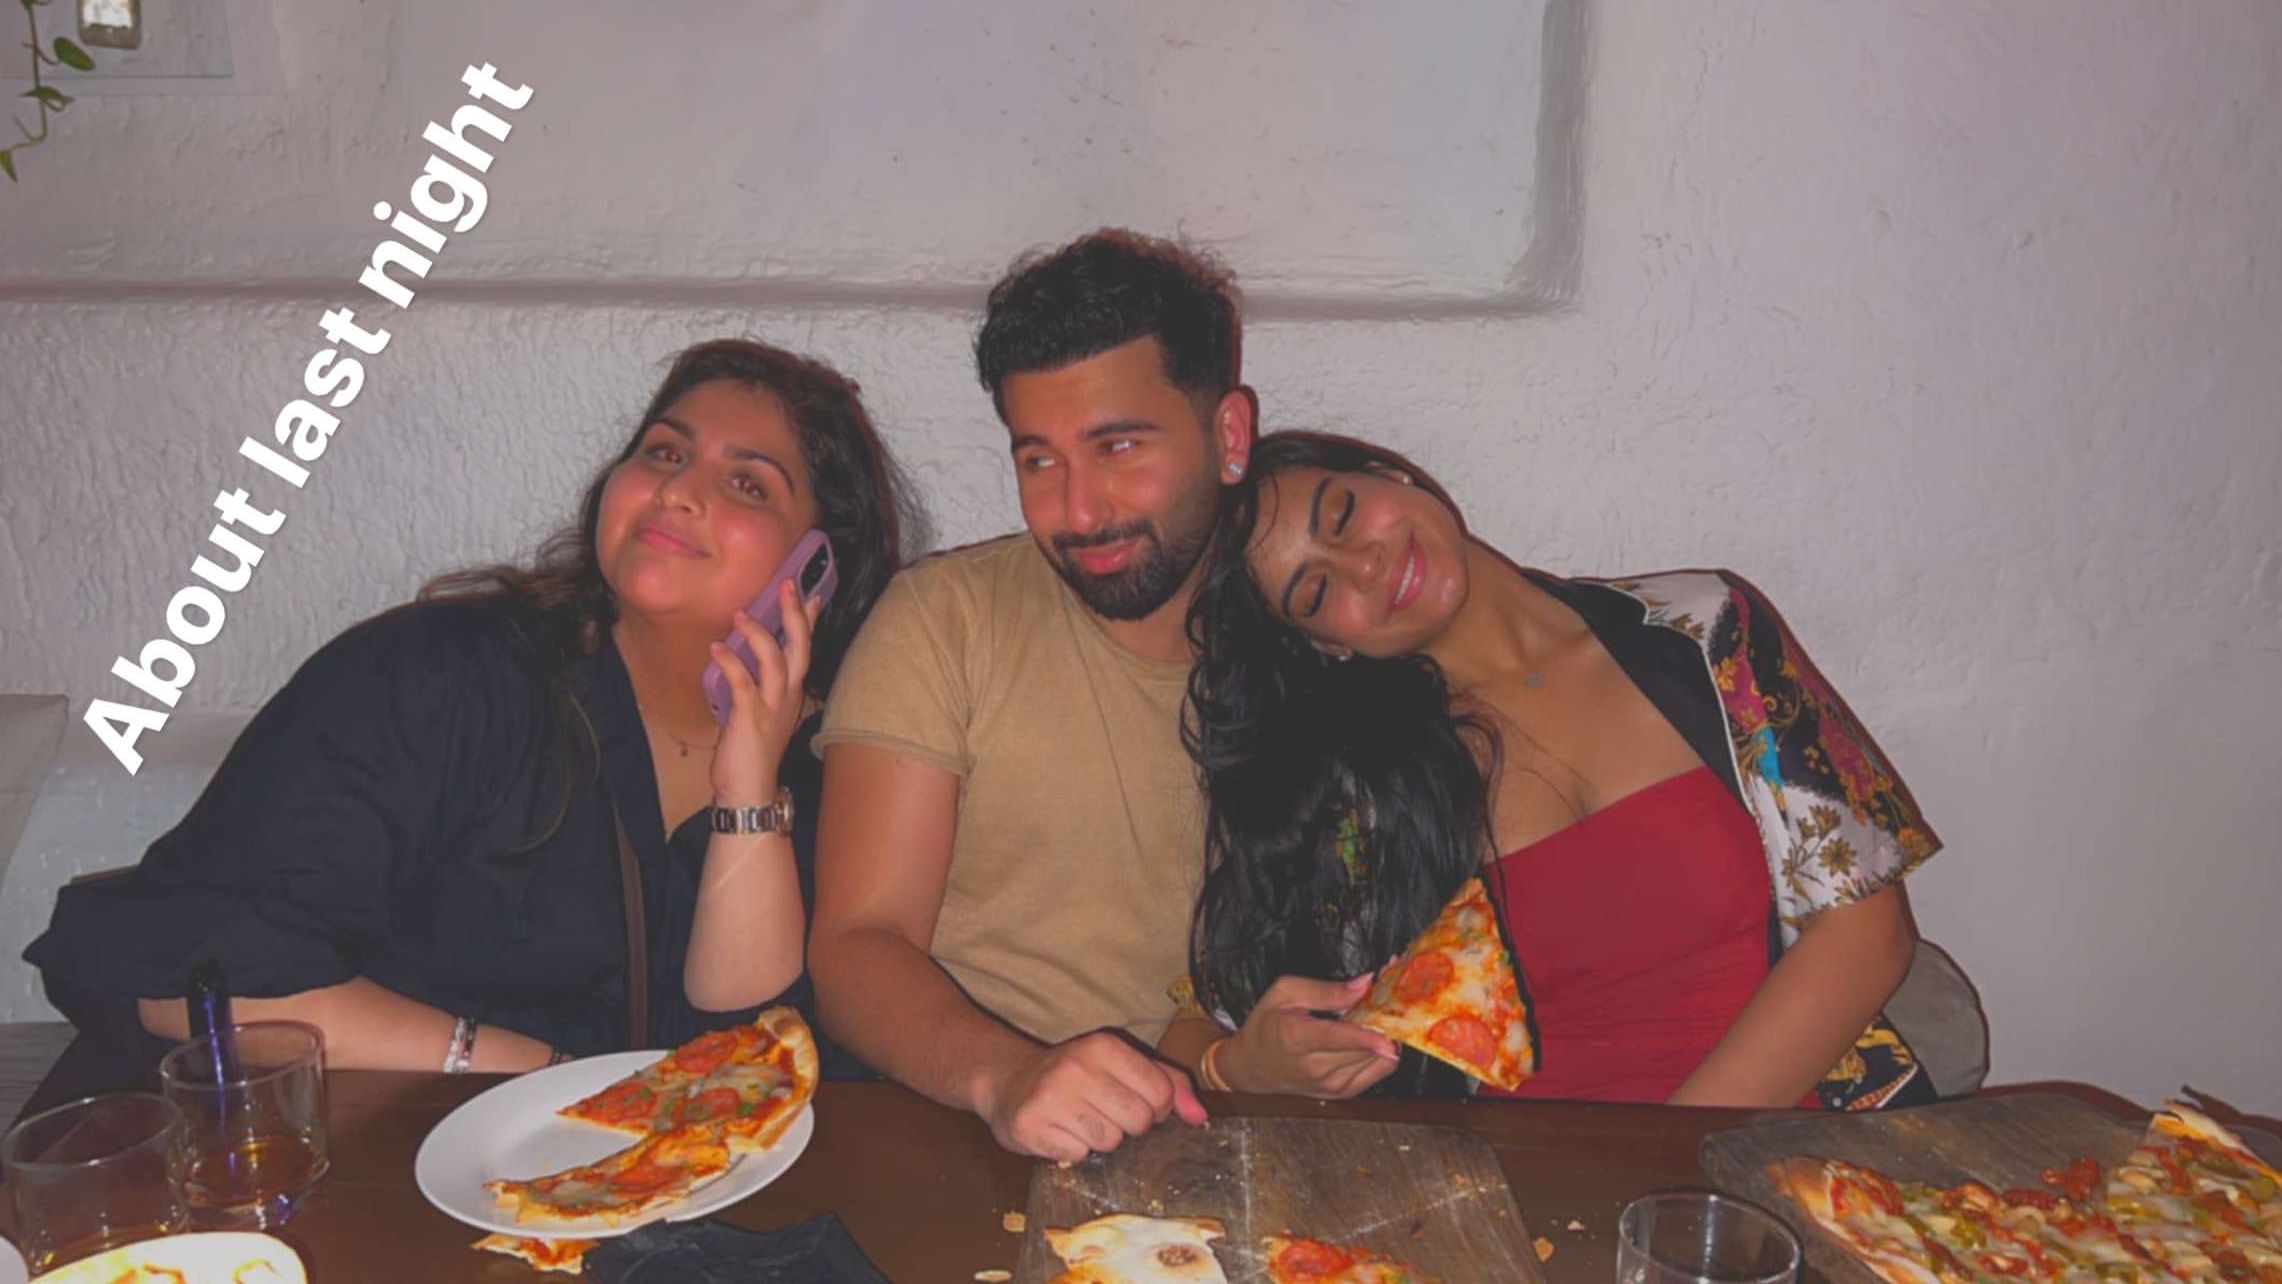 Khushi Kapoor, Nysa Devgan are too relatable as they gorge on pizzas in inside pics from party